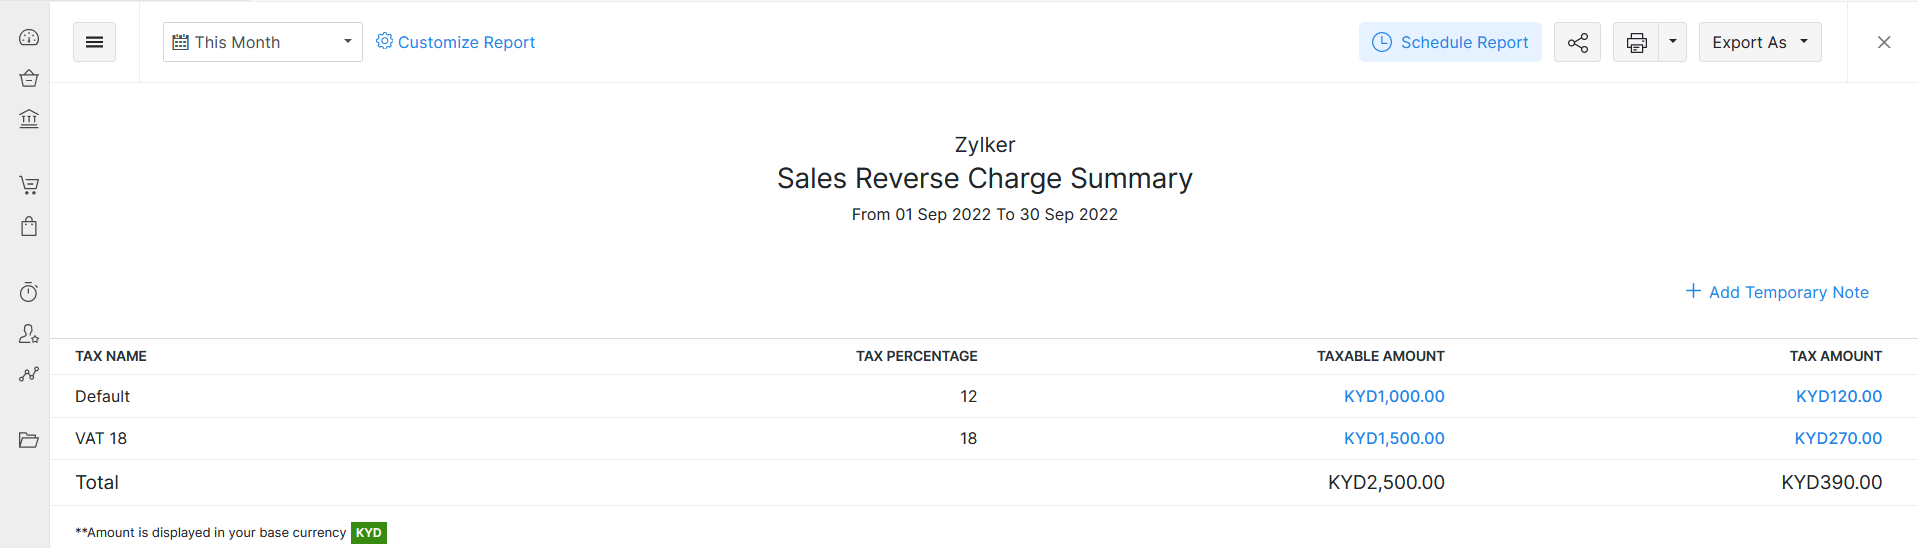 Sales Reverse Charge Summary report